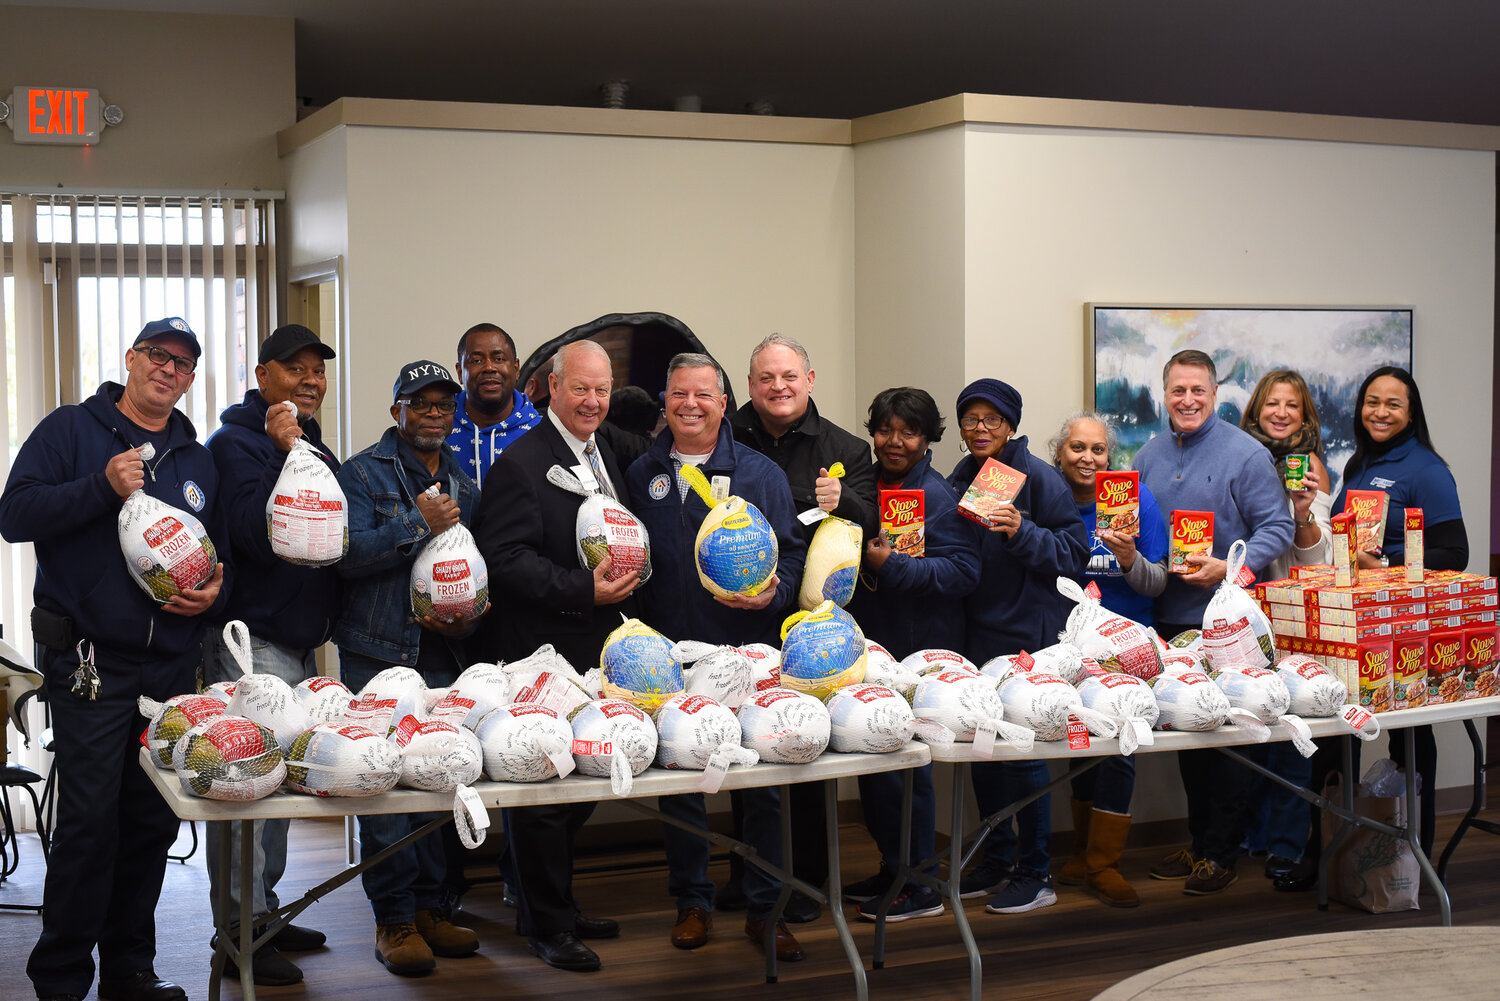 Assemblyman Brian Curran, in partnership with Green Acres Mall, Freeport Housing Authority, and Mayor Robert Kennedy, delivered turkeys to Freeport residents on Nov. 22, aiming to provide a heartwarming Thanksgiving meal amid economic challenges.